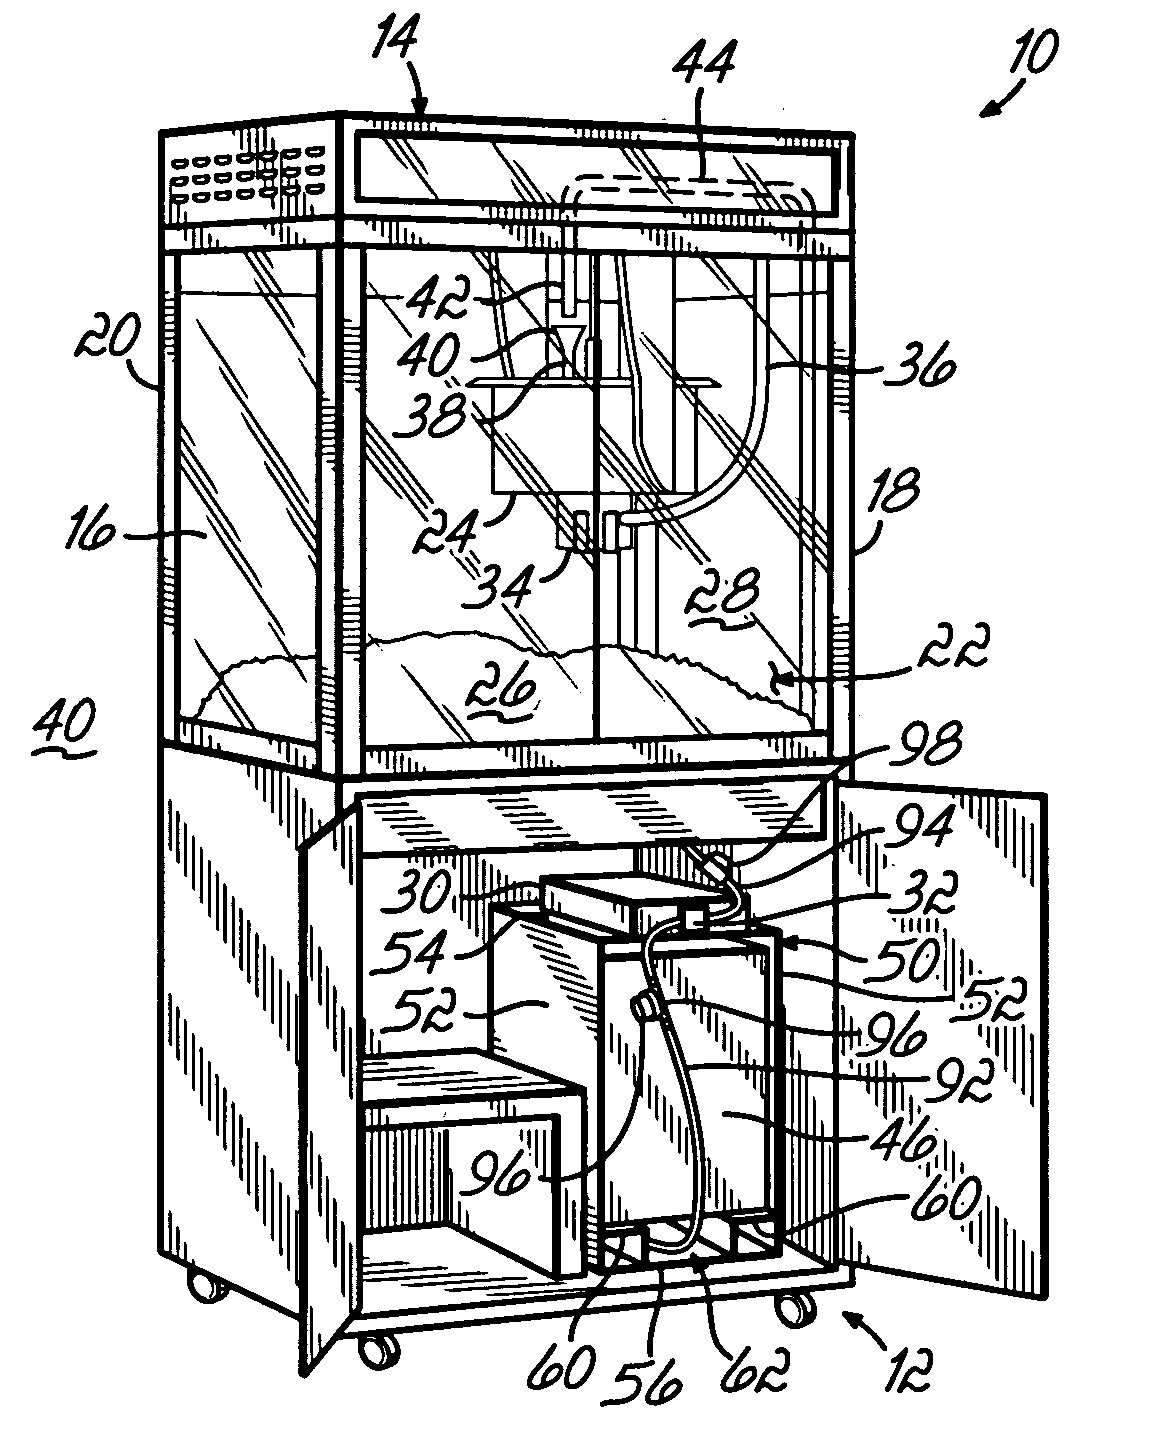 Oil delivery system for a popcorn popping machine